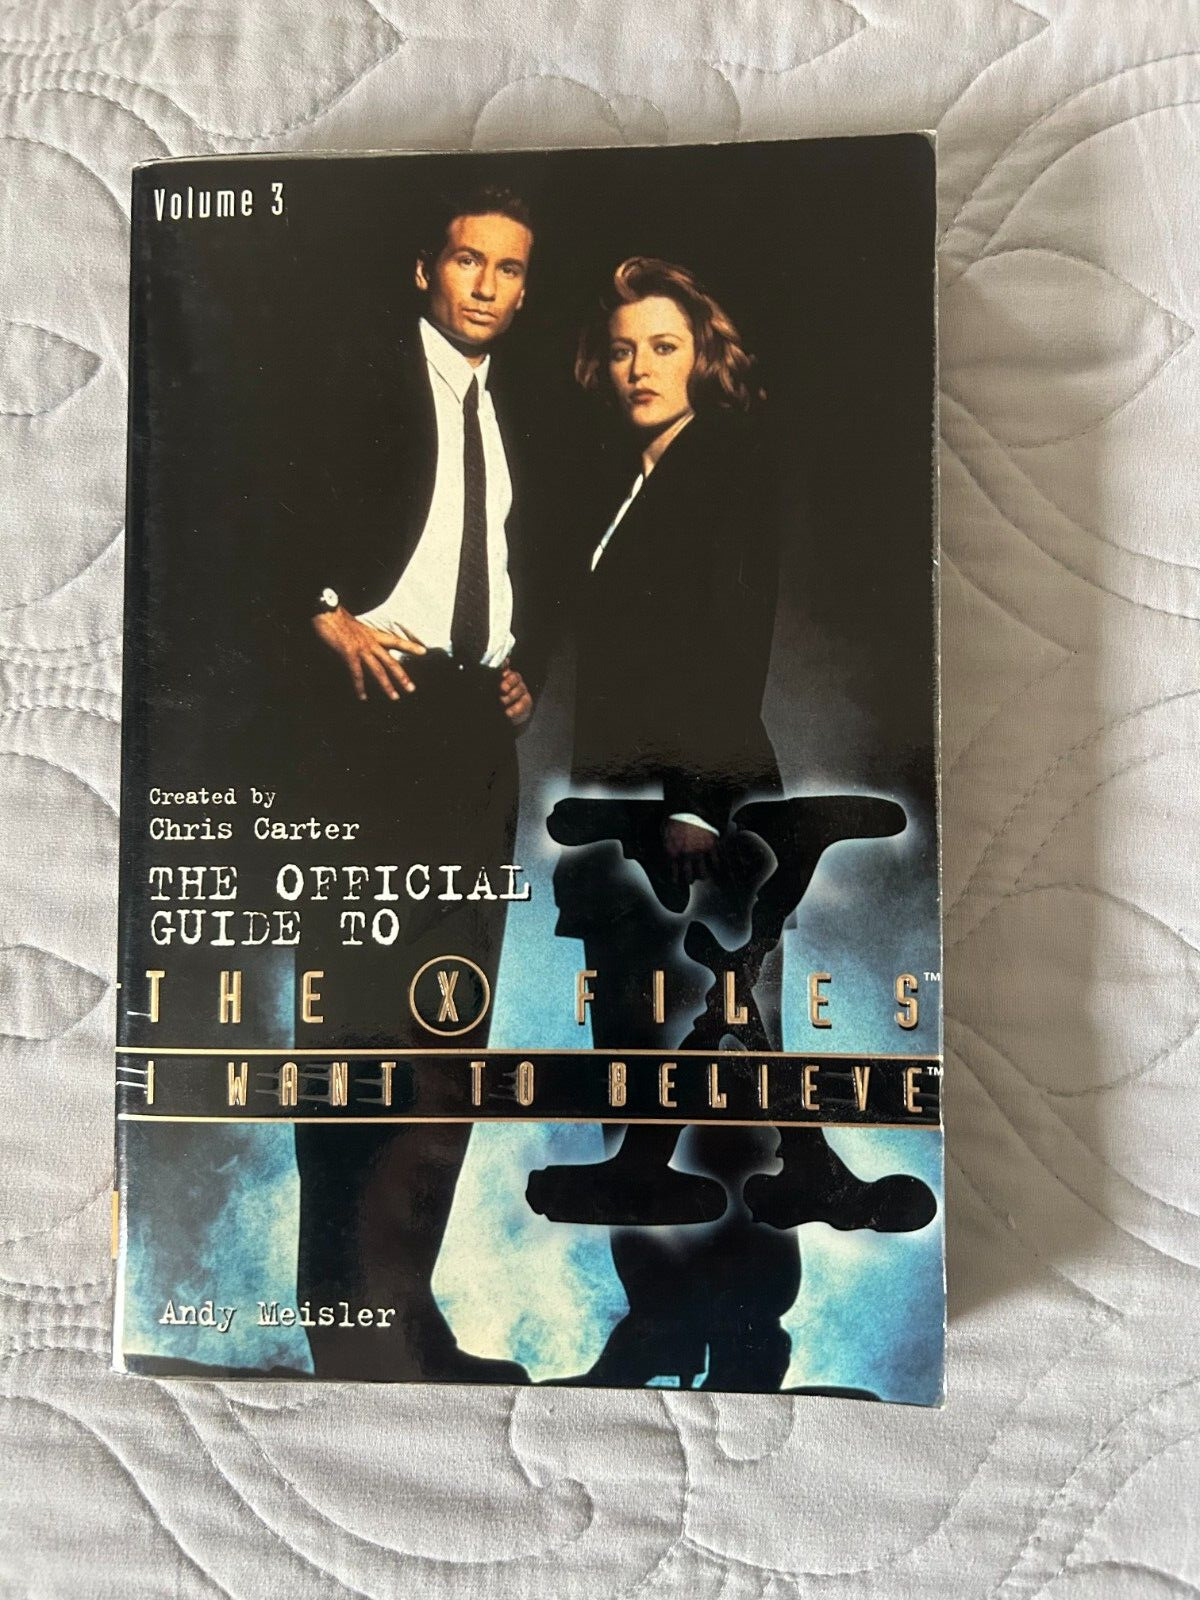 X-Files I Want to Believe Book AUTOGRAPHED Vince Gilligan Steven Williams 3 more